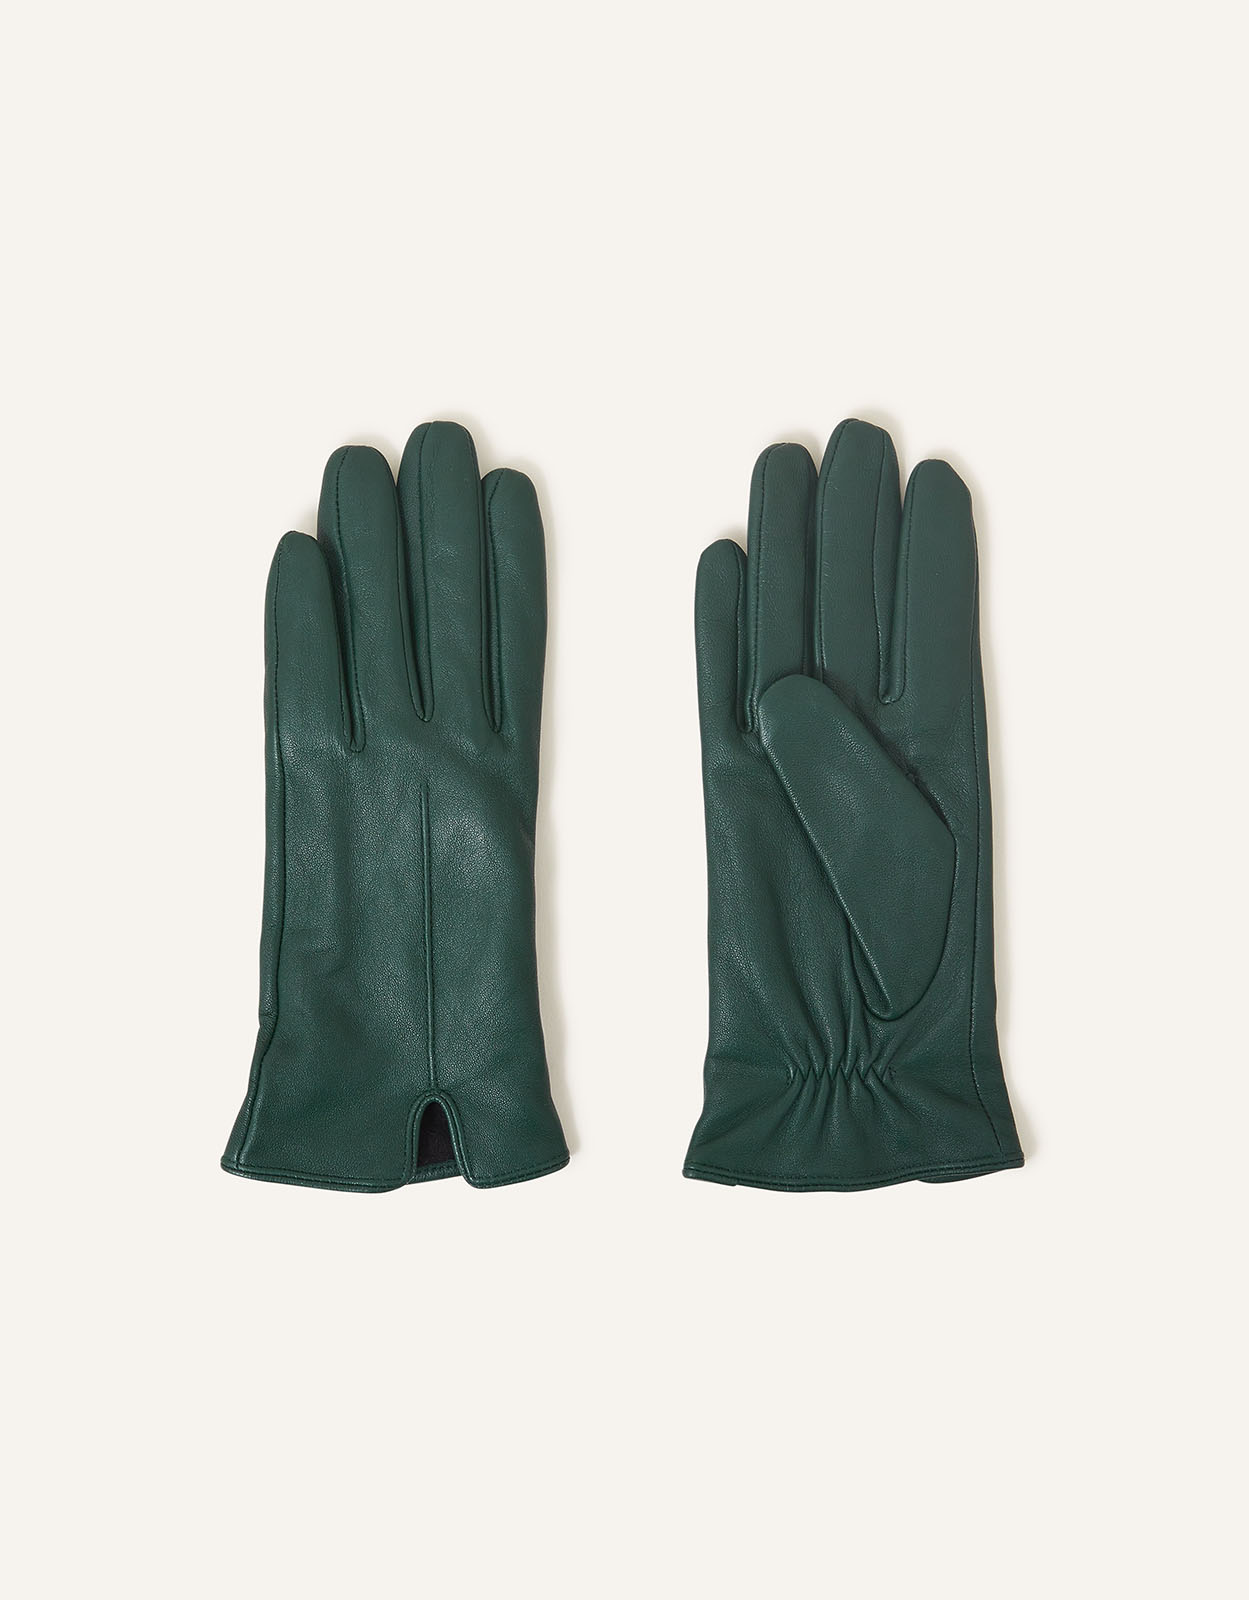 Accessorize Women's Luxe Leather Gloves Green, Size: M / L